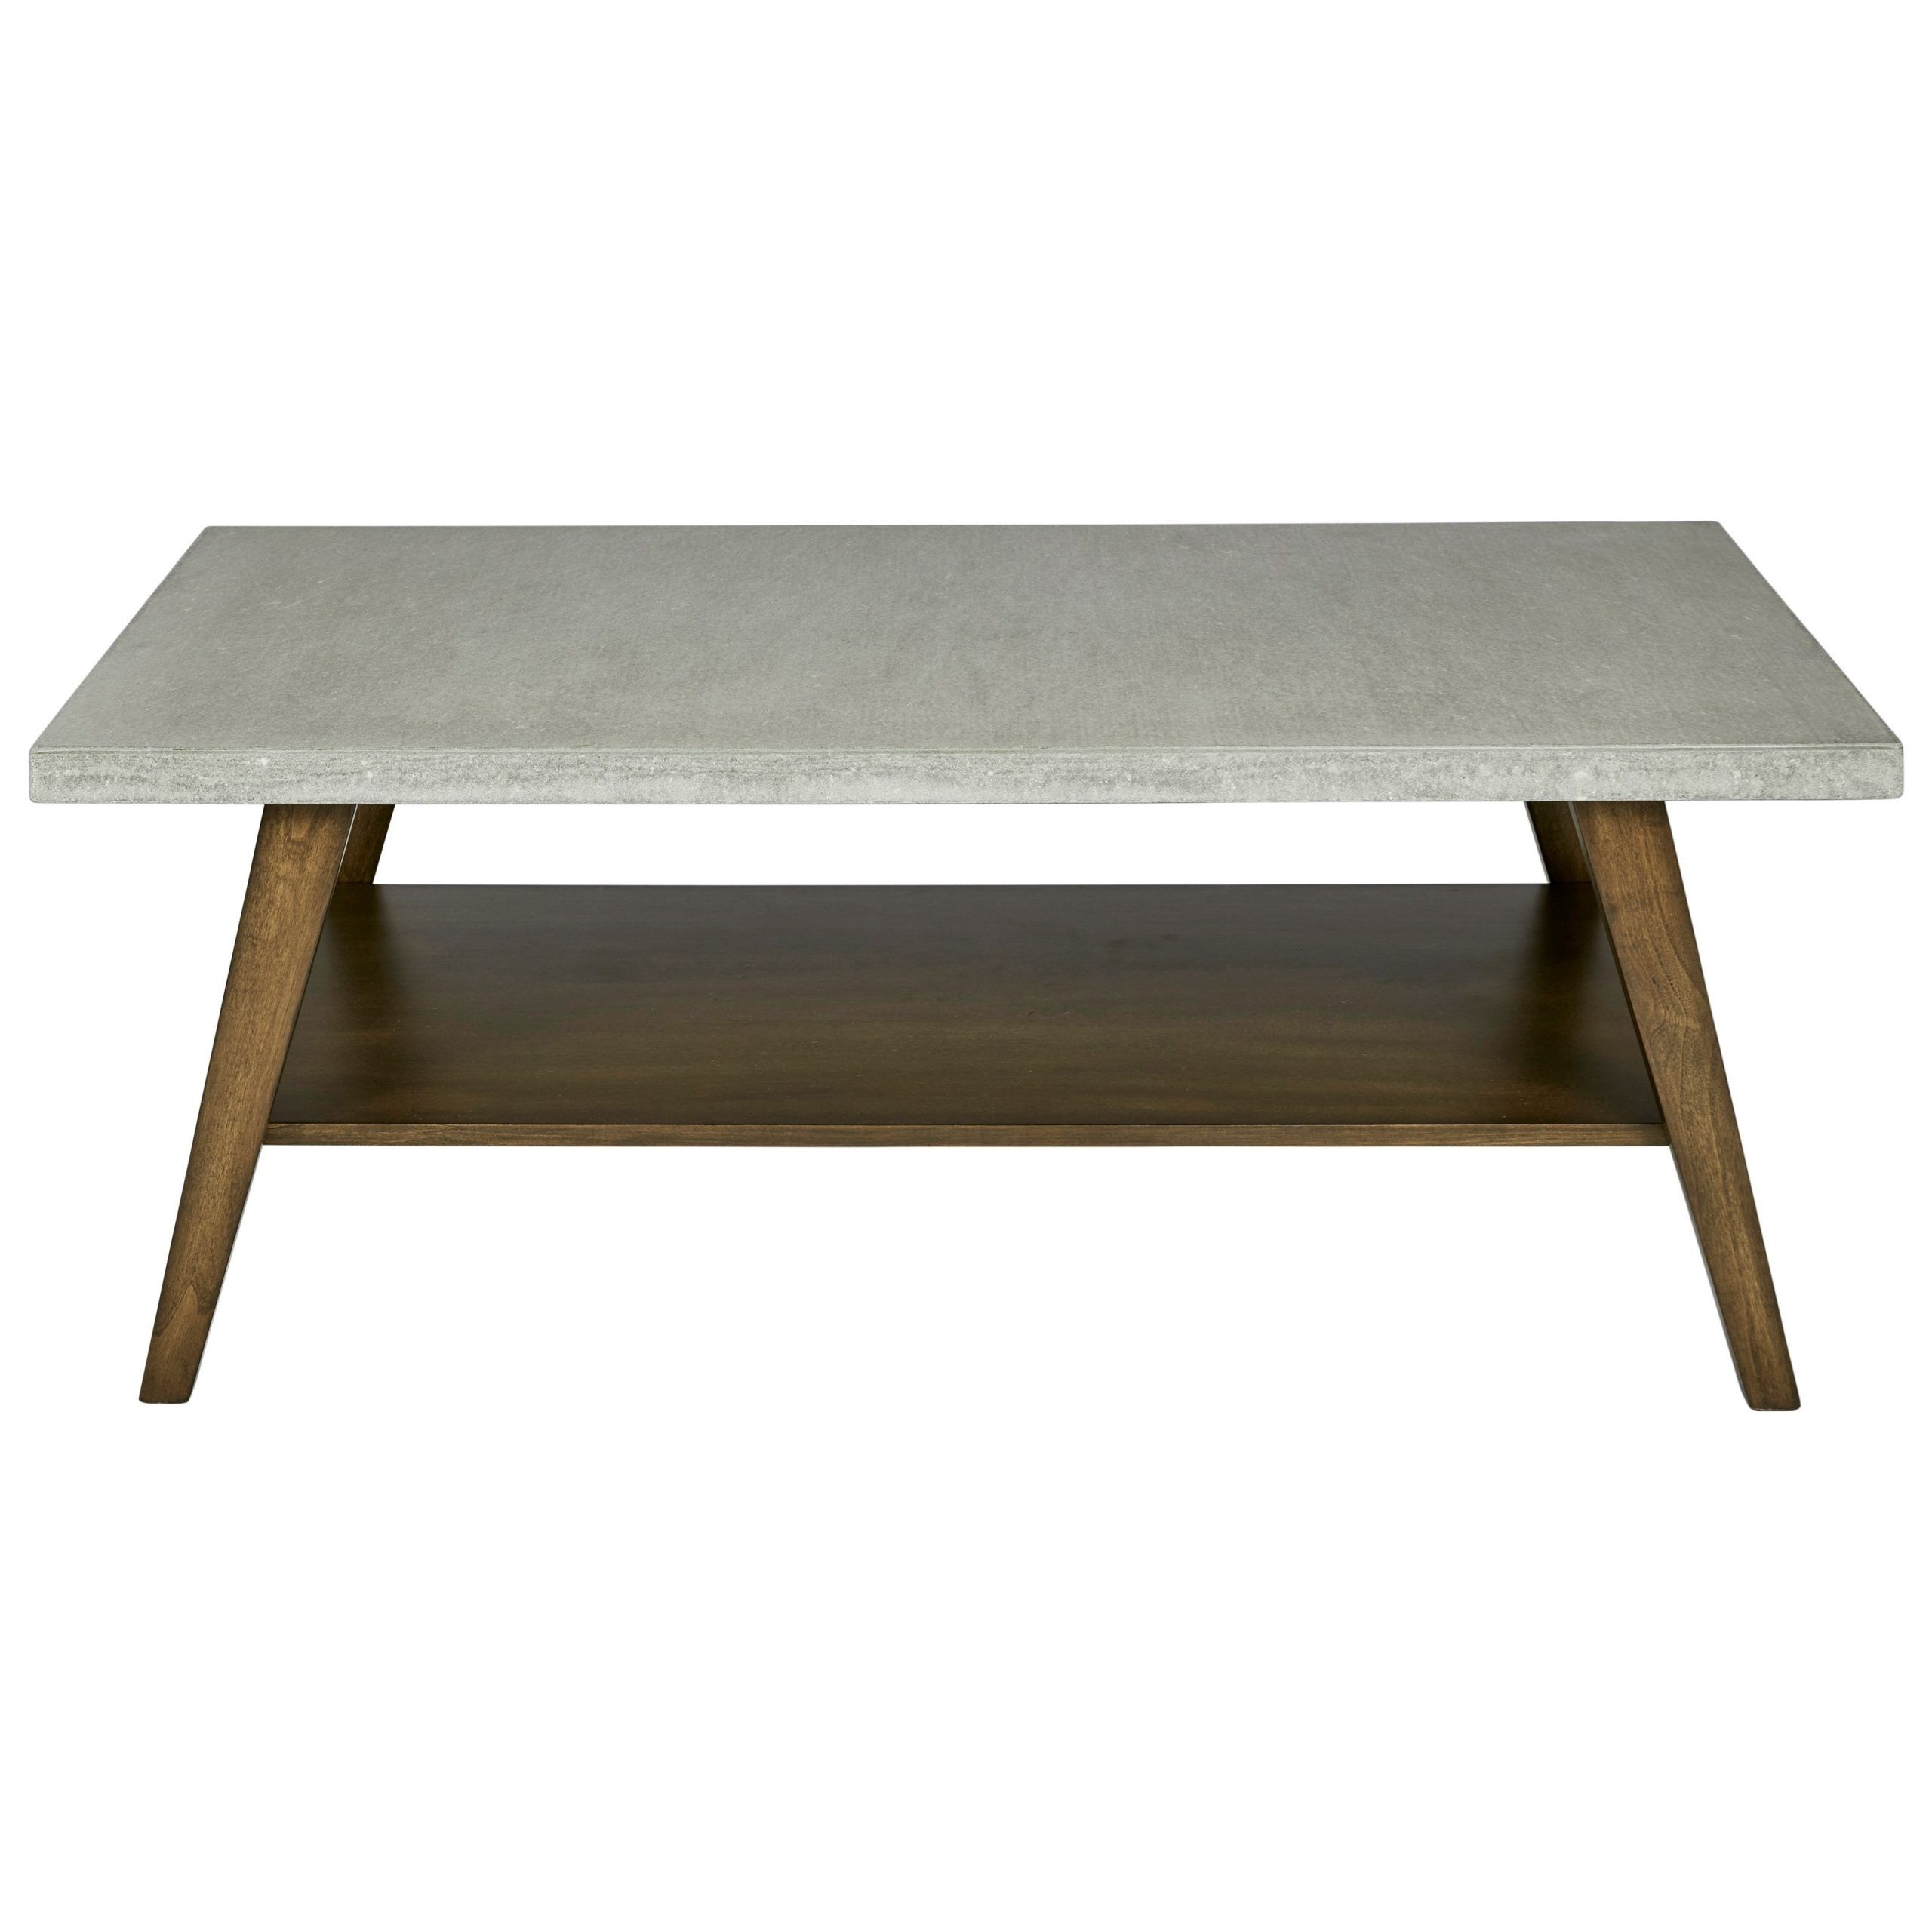 Progressive Furniture Jackson T544 01 Contemporary Rectangular Cocktail  Table With Concrete Table Top | Bullard Furniture | Cocktail/Coffee Tables Intended For Progressive Furniture Cocktail Tables (View 7 of 15)